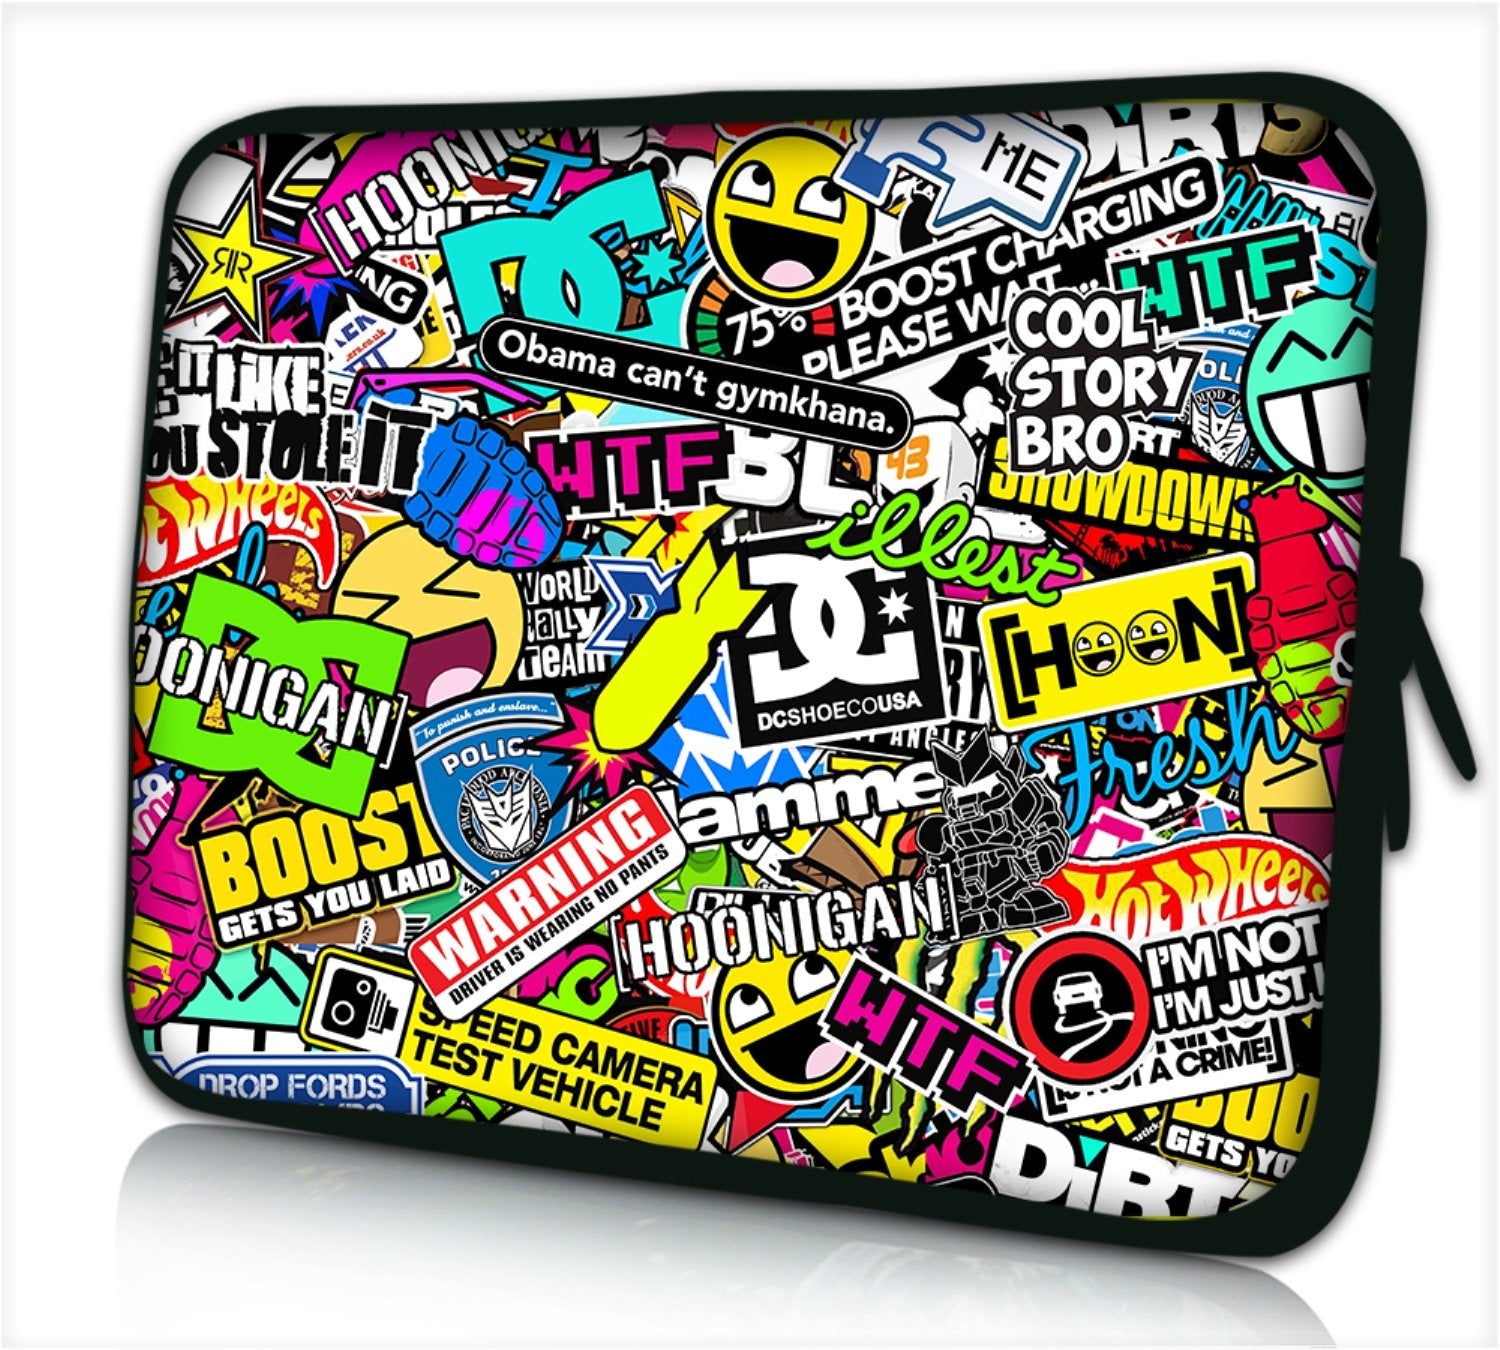 13"- 13.3"inch Tablet Laptop Case Bag Pouch Protective Cover by Funky Planet Bags/Cases *Labels*